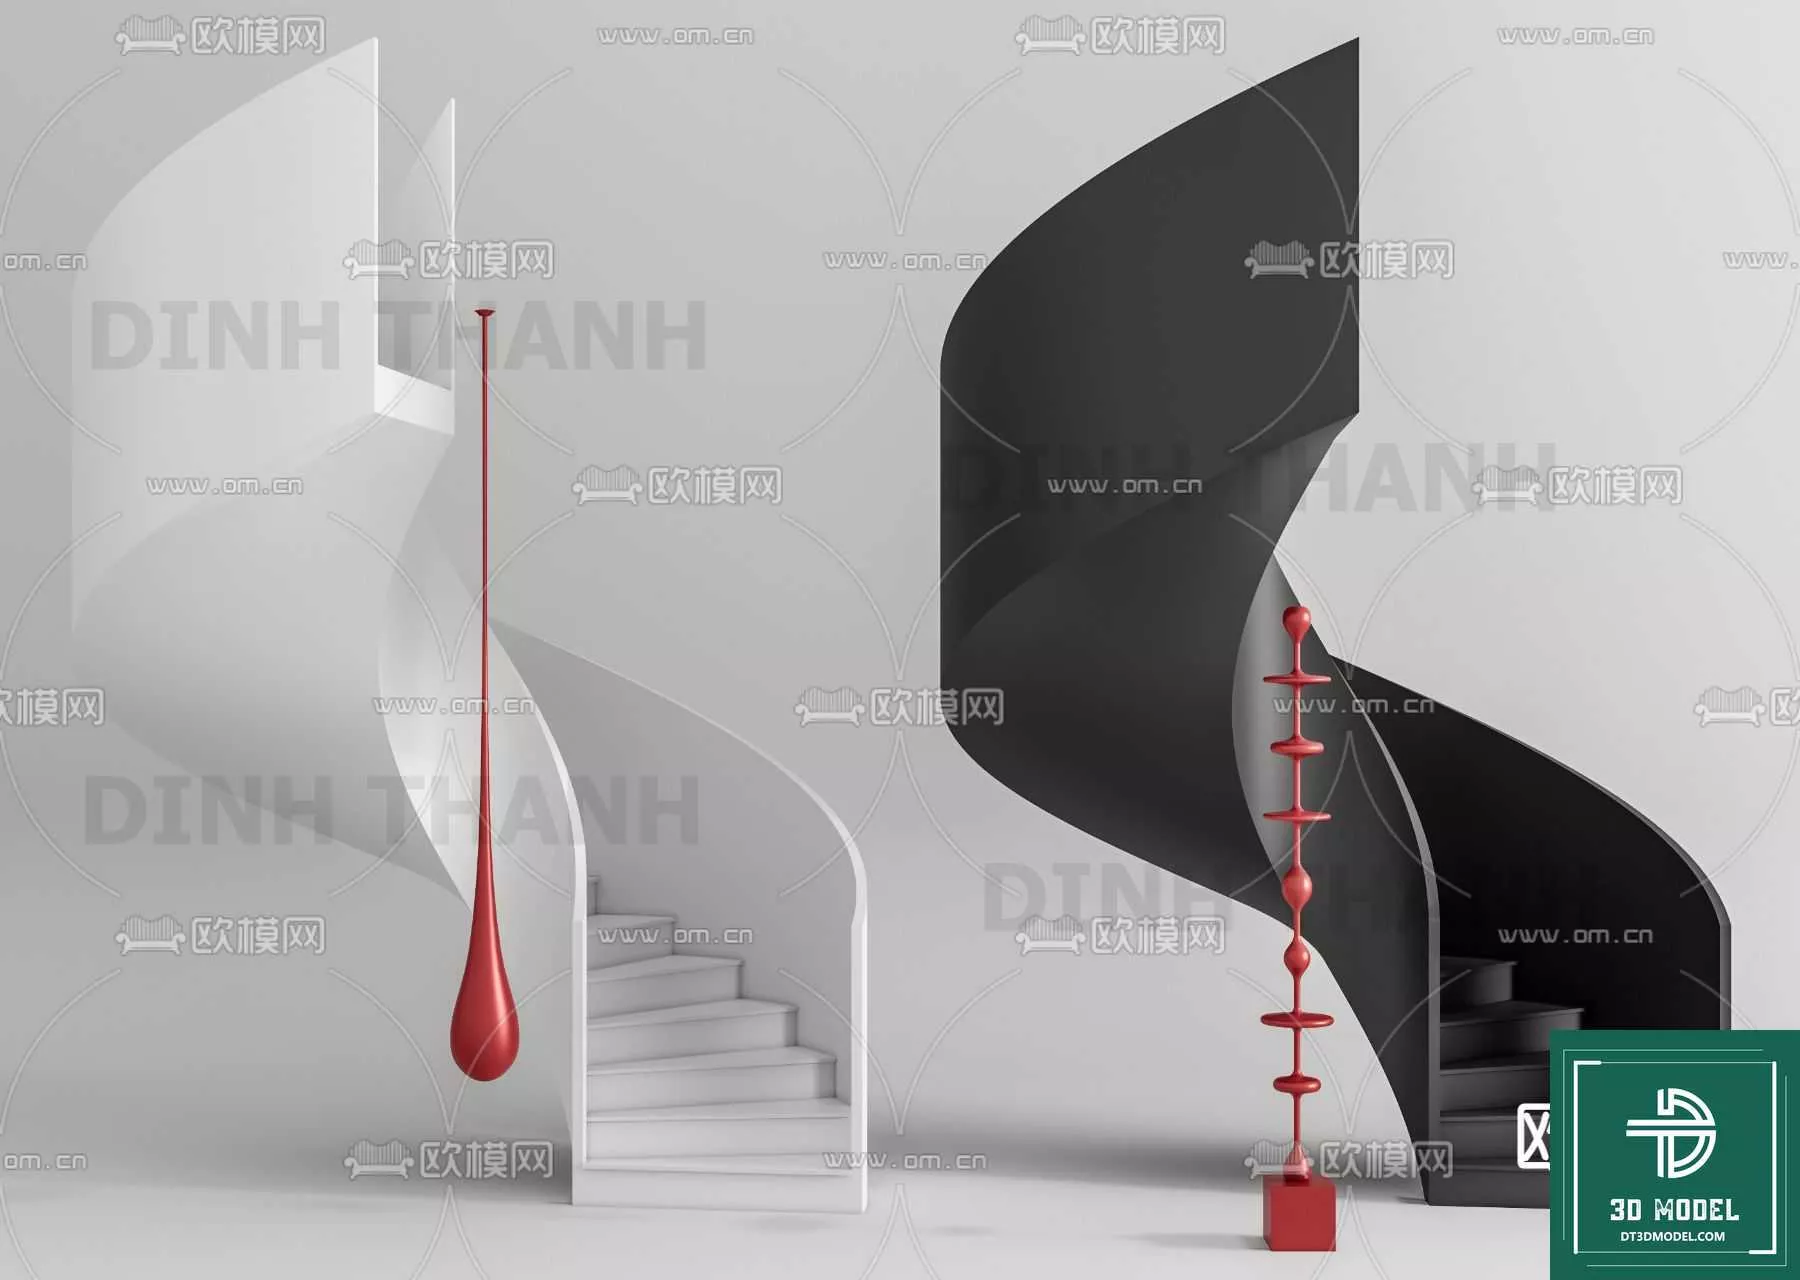 MODERN STAIR - SKETCHUP 3D MODEL - VRAY OR ENSCAPE - ID14154